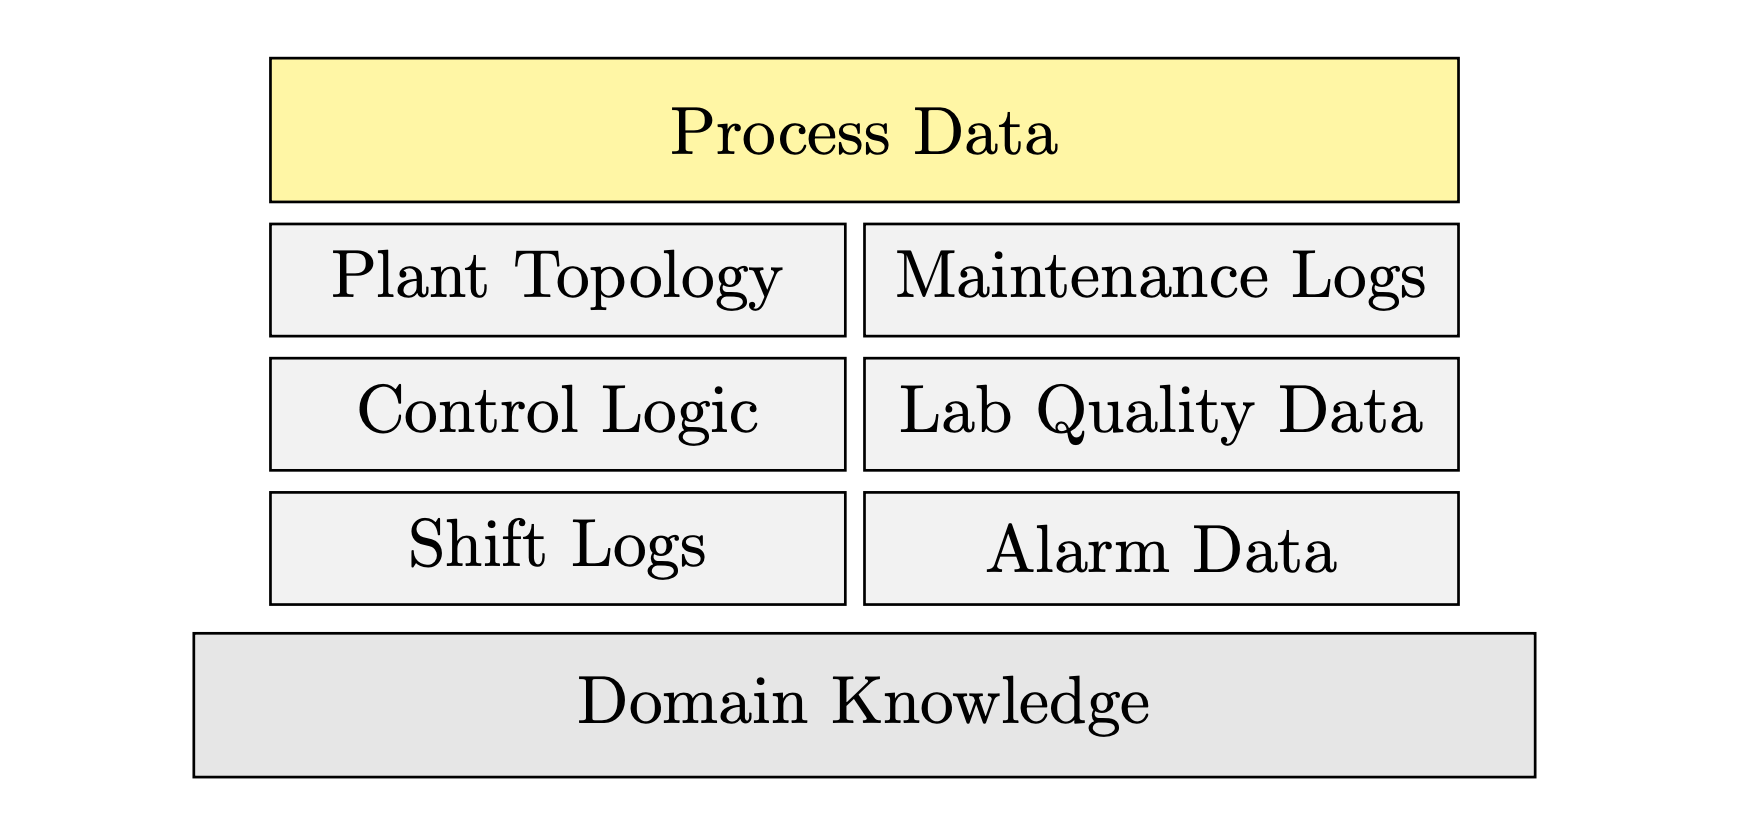 Data Quality Over Quantity: Pitfalls and Guidelines for Process Analytics by Lim C. Siang, Shams Elnawawi, Lee D. Rippon, Daniel L. O’Connor, R. Bhushan Gopaluni